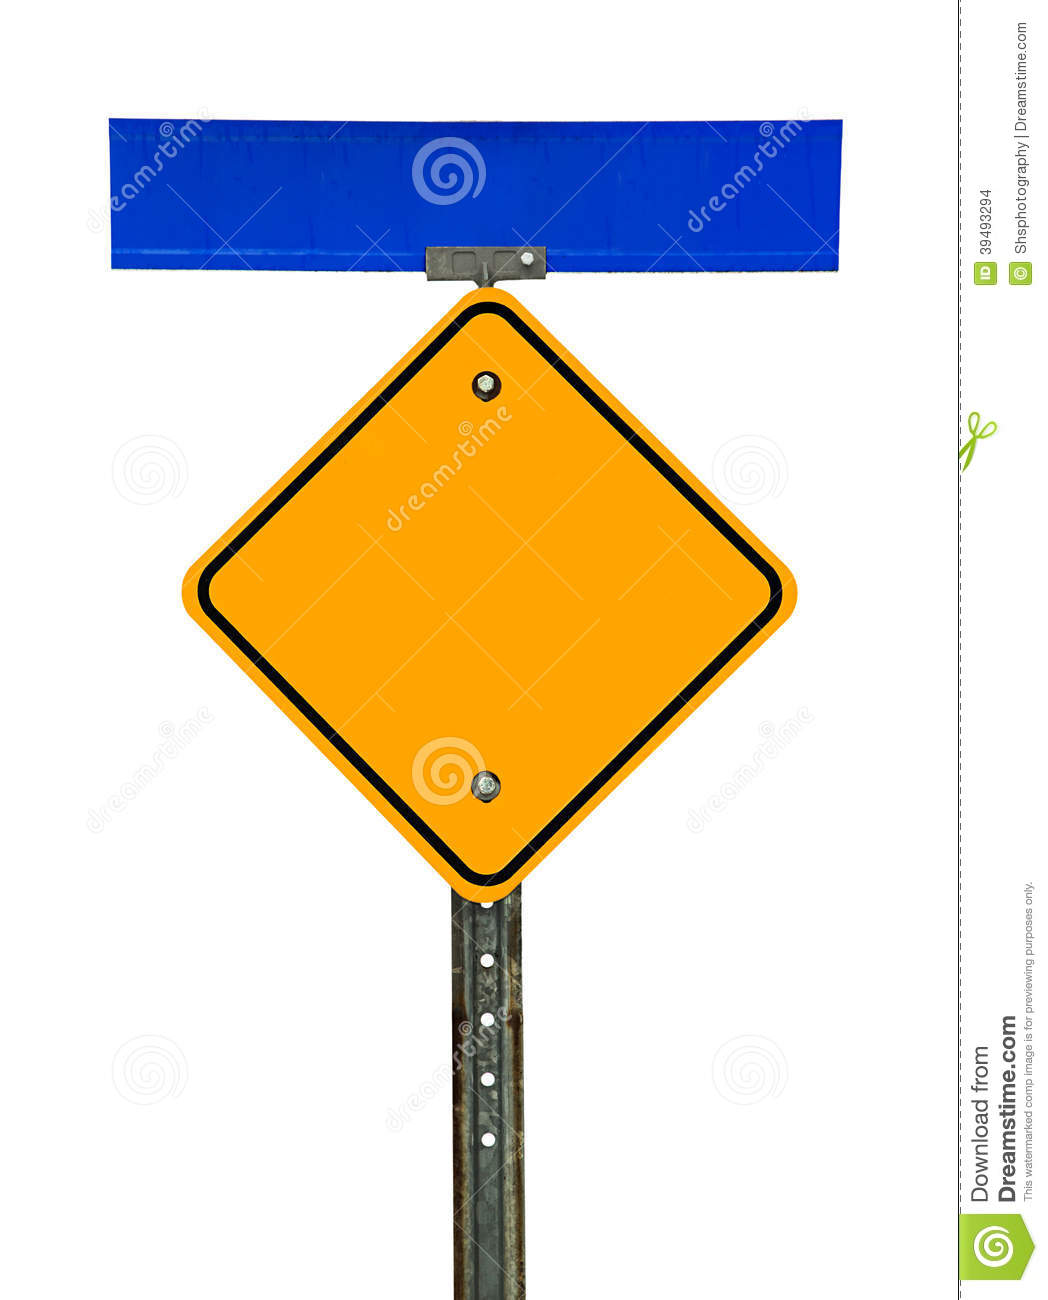 Blank Diamond Caution Sign With Street Sign Above Stock Photo   Image    